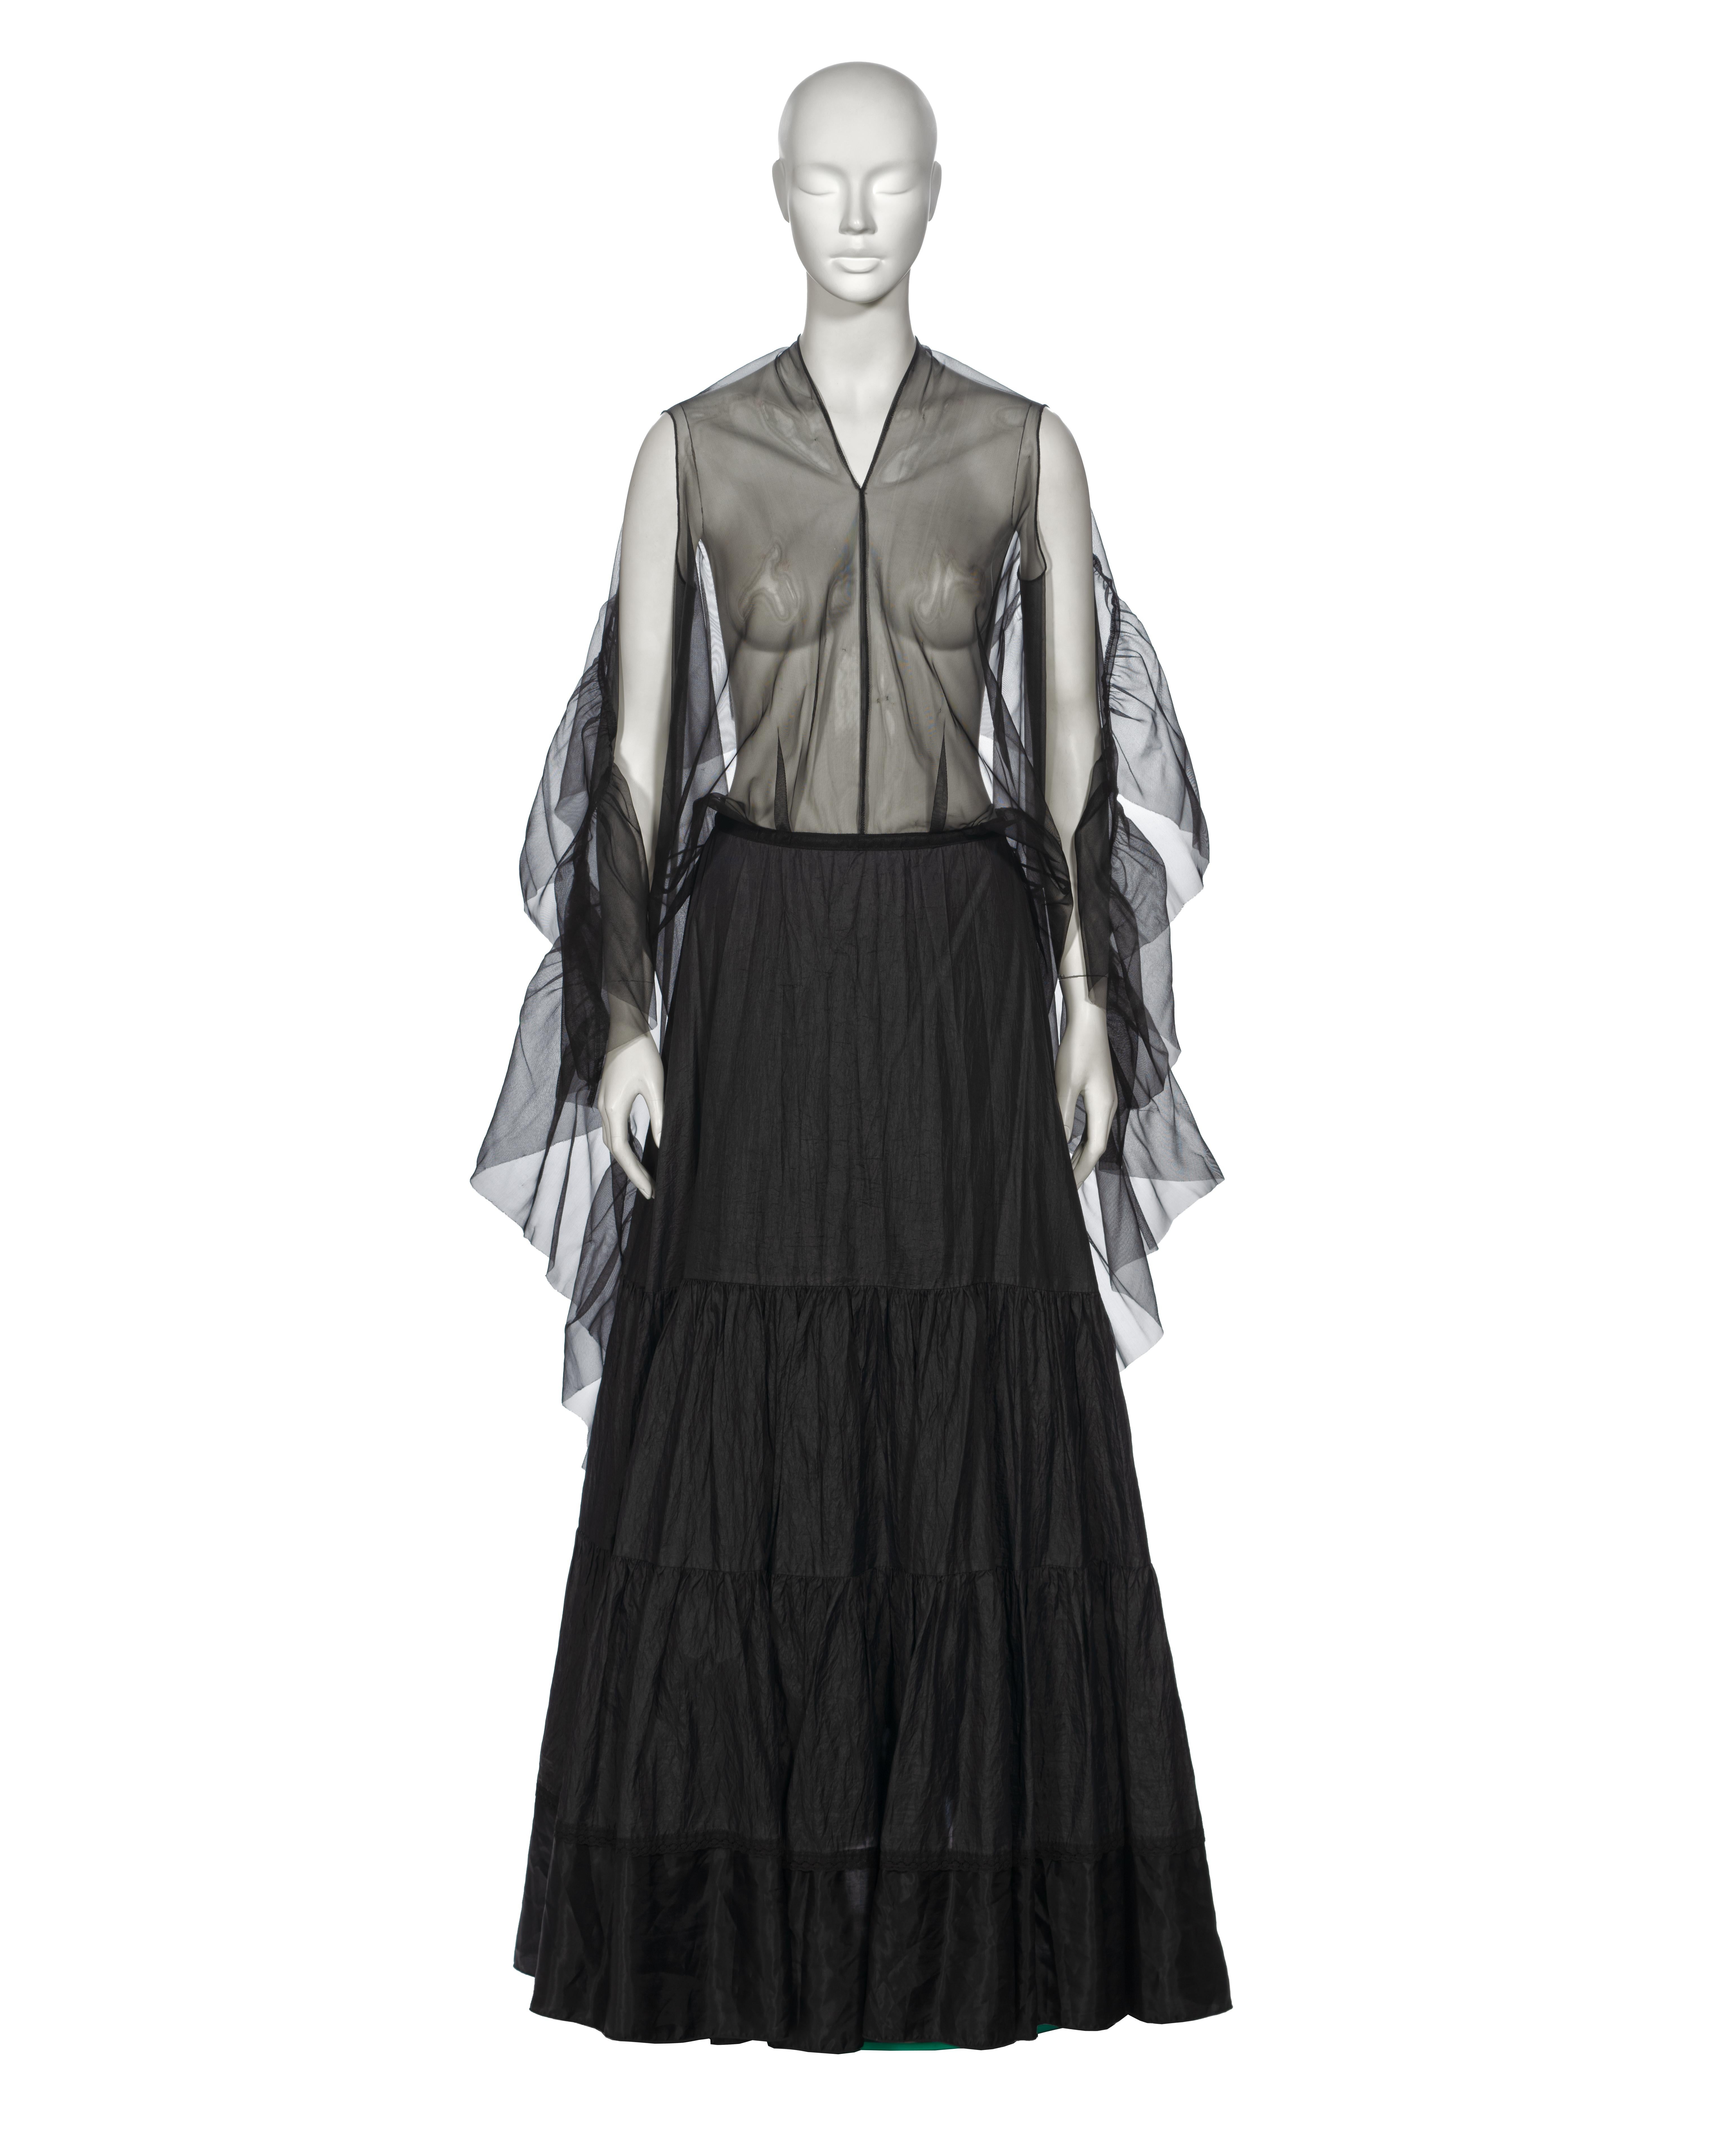 ▪ Archival Margiela Evening Dress
▪ Creative Director: Martin Margiela 
▪ Spring-Summer 2003
▪ Museum Grade 
▪ Constructed from repurposed vintage petticoats
▪ The outer skirt showcases tiered pleated panels in crinkled lining fabric
▪ Built-in